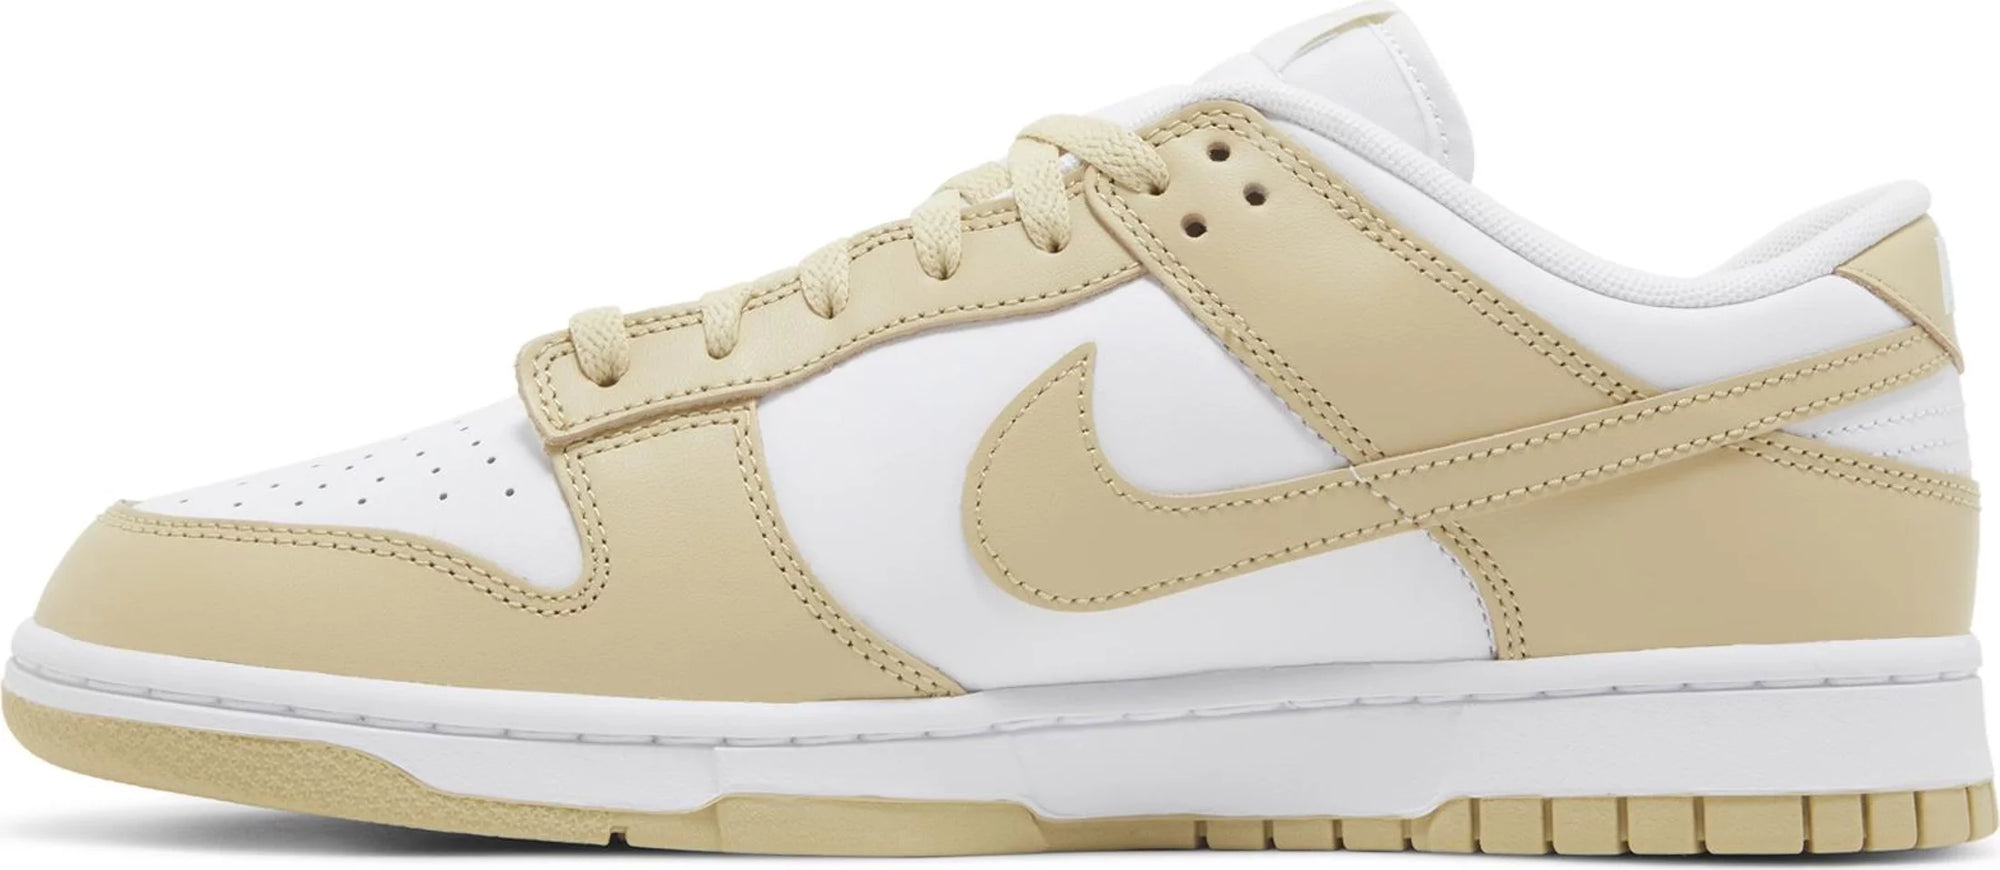 Nike Dunk Low - Team Gold